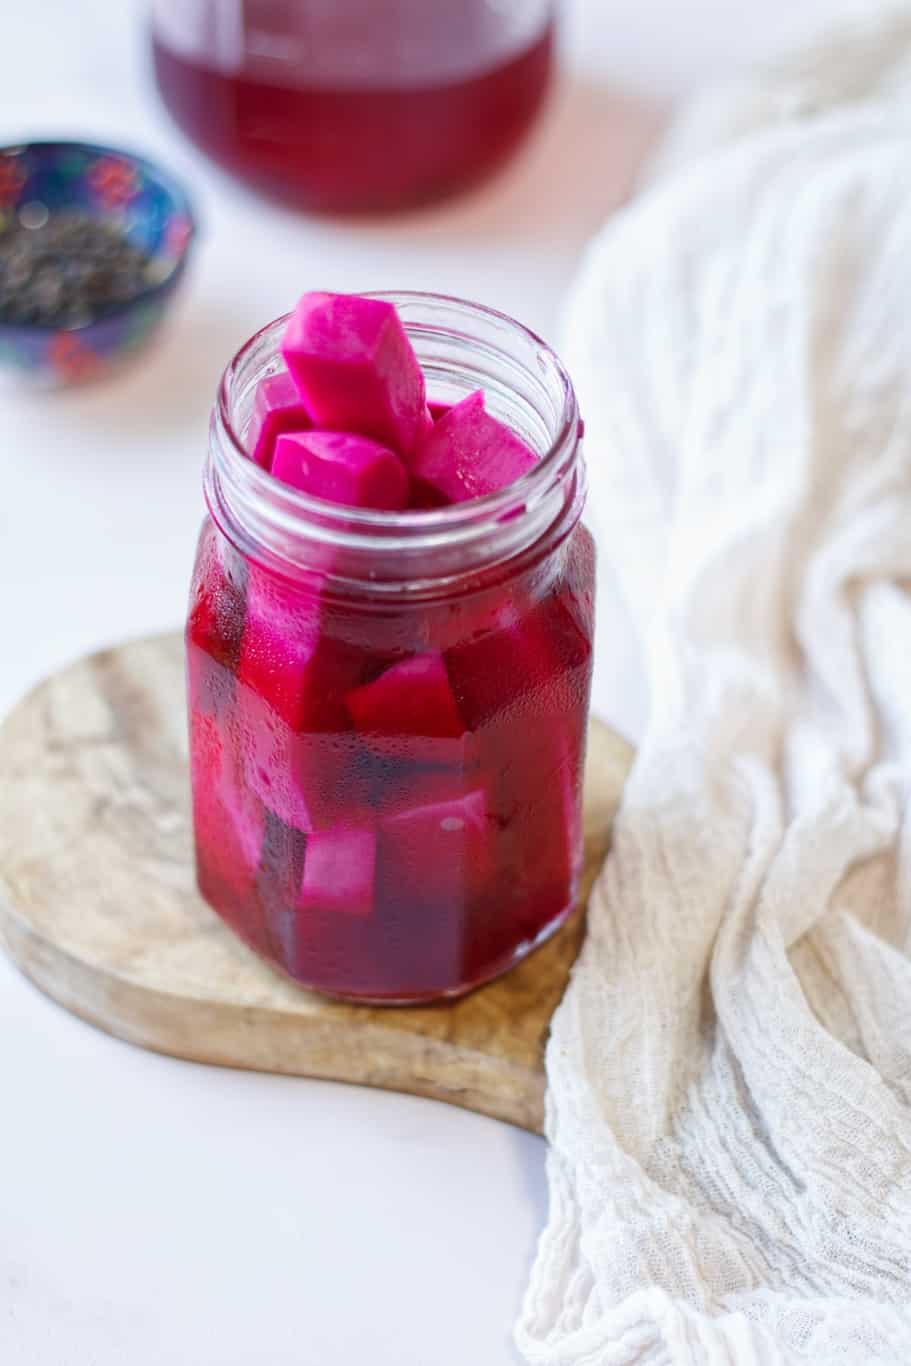 A jar of refrigerator pink pickled turnips which are cut into ½-inch thickness, about the size of French fries.